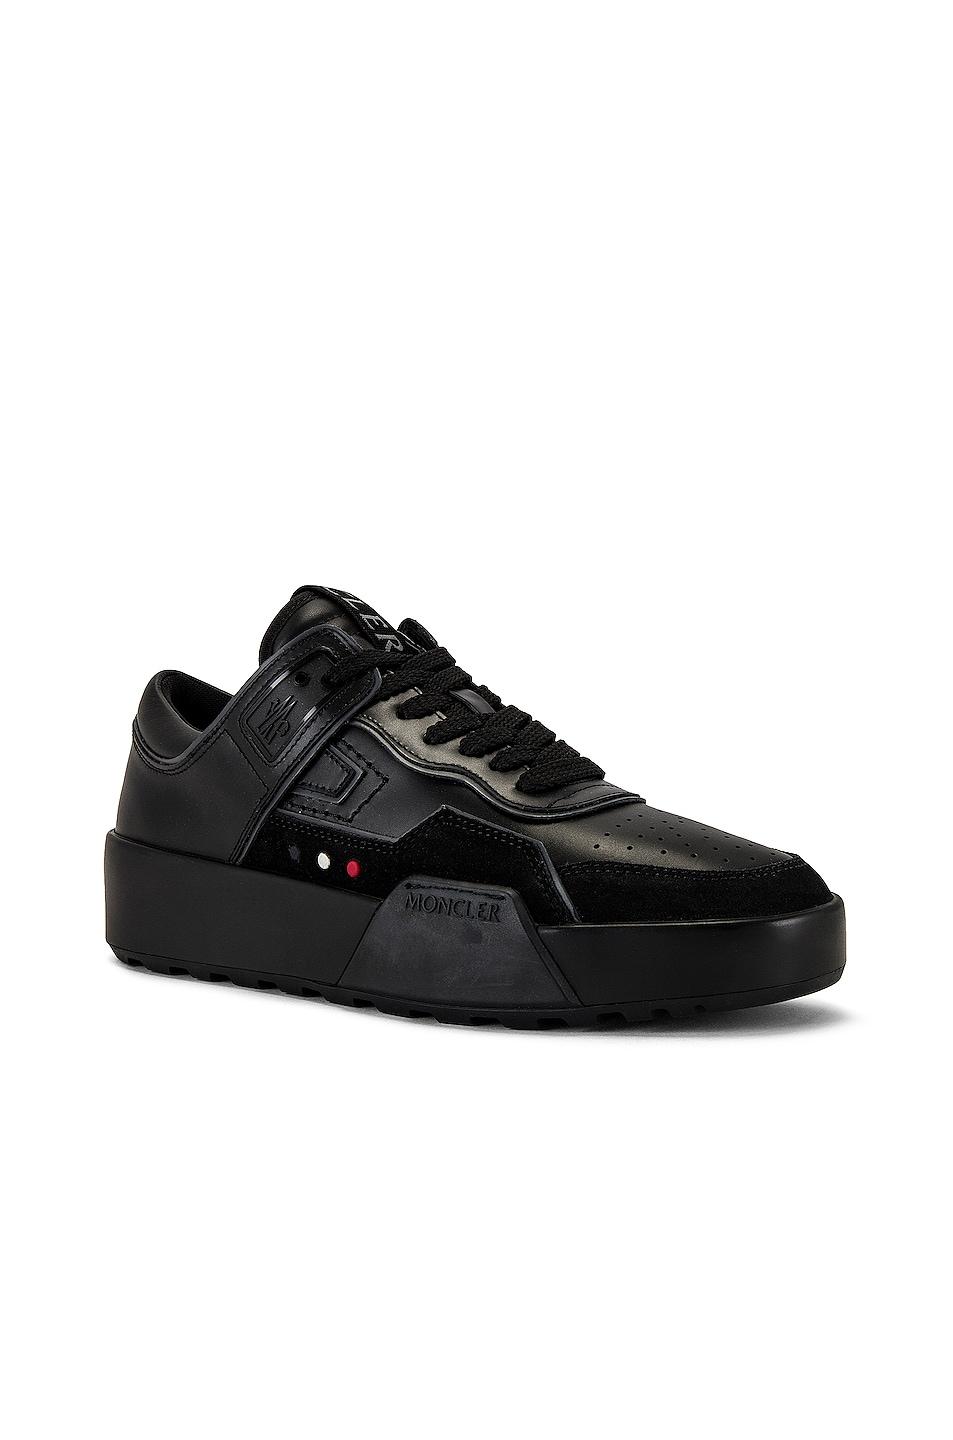 Moncler Leather Promyx Space Low Top Sneakers in Black for Men 